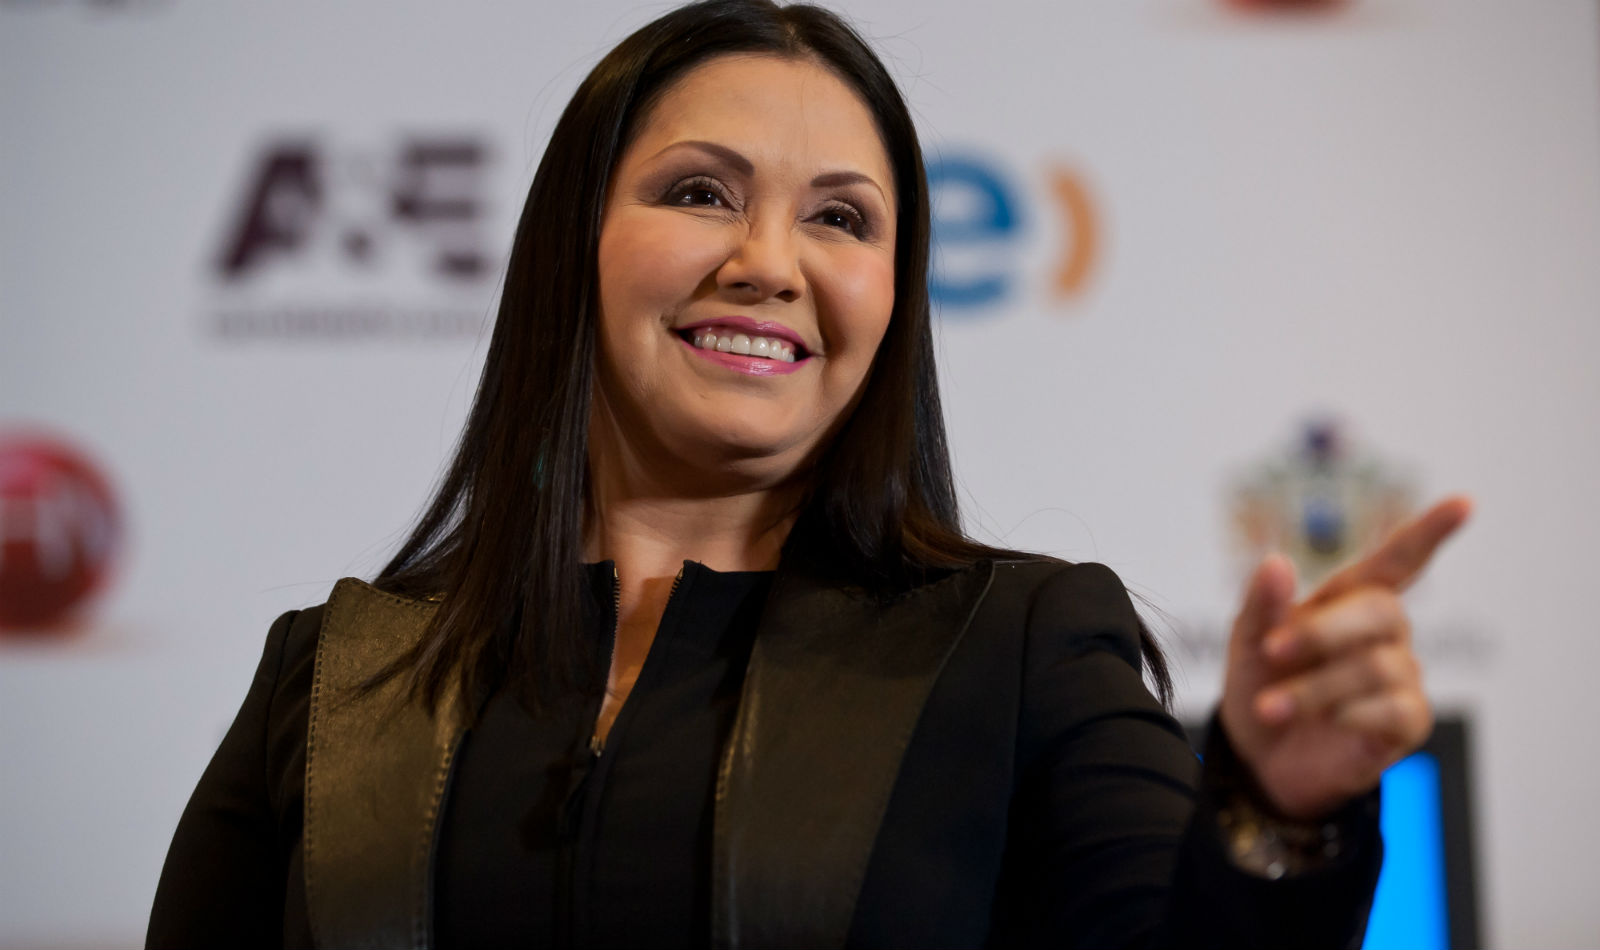 Ana gabriel pictures